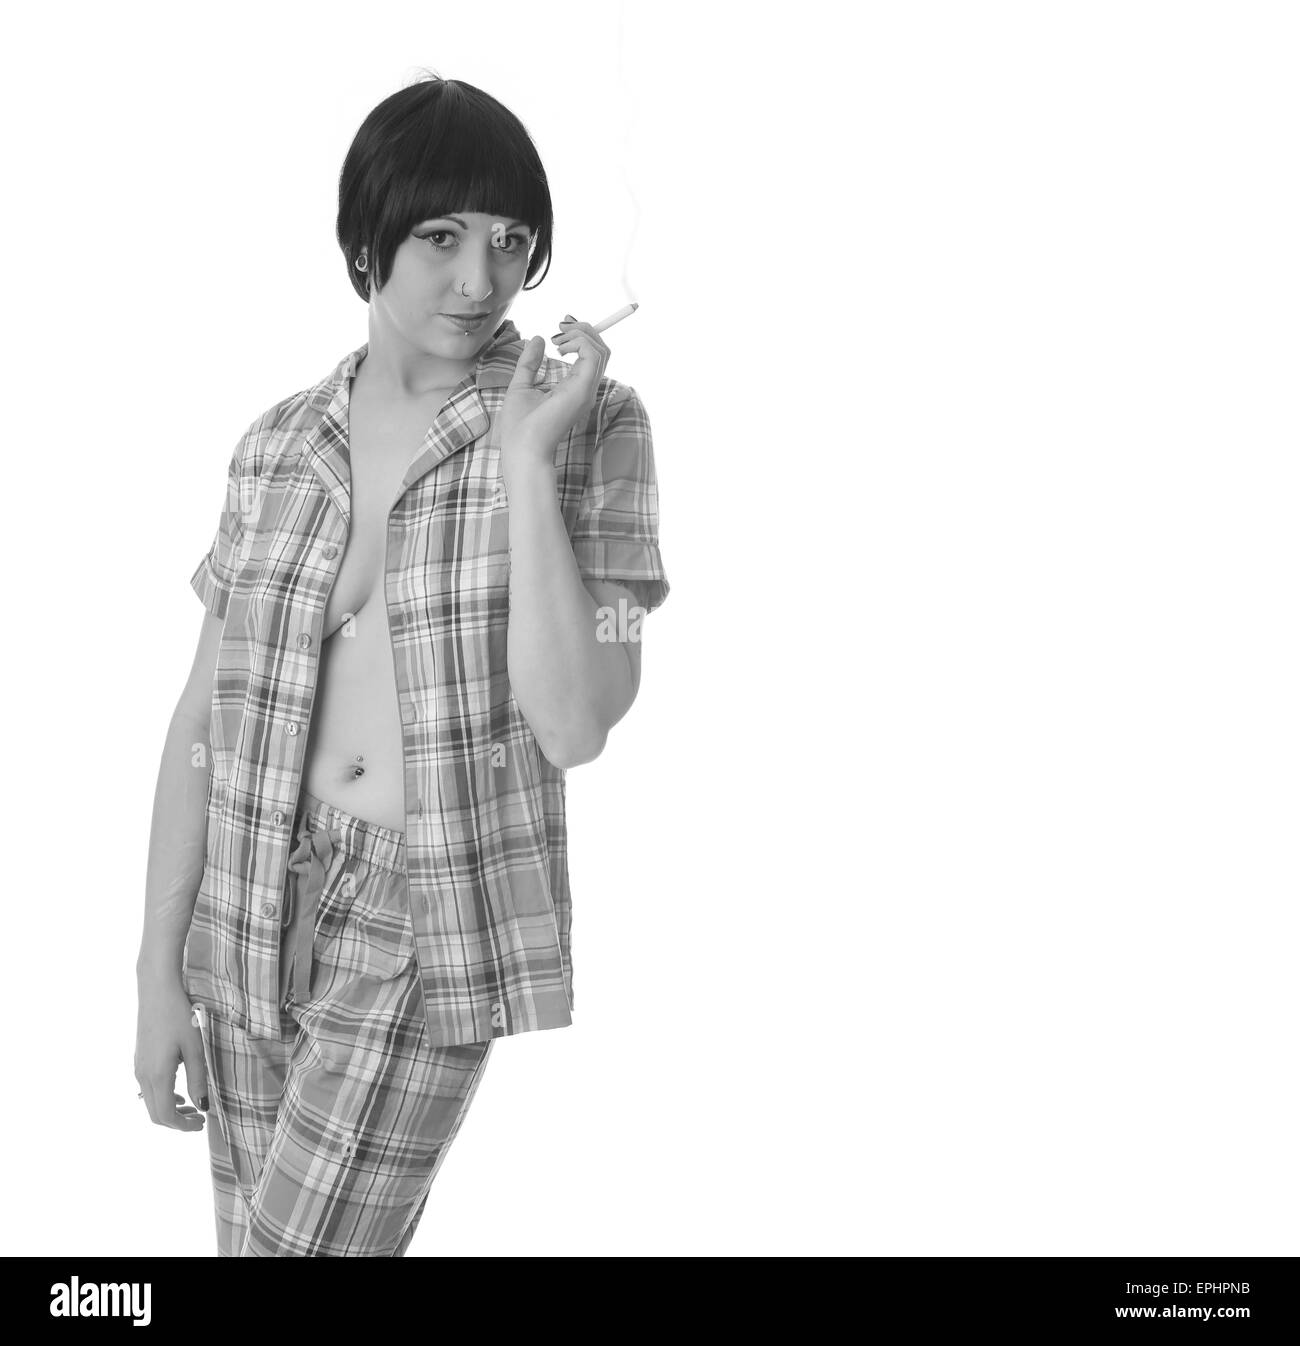 May 2015 - Beautiful young woman in traditional pajamas relaxing and having a cigarette Stock Photo